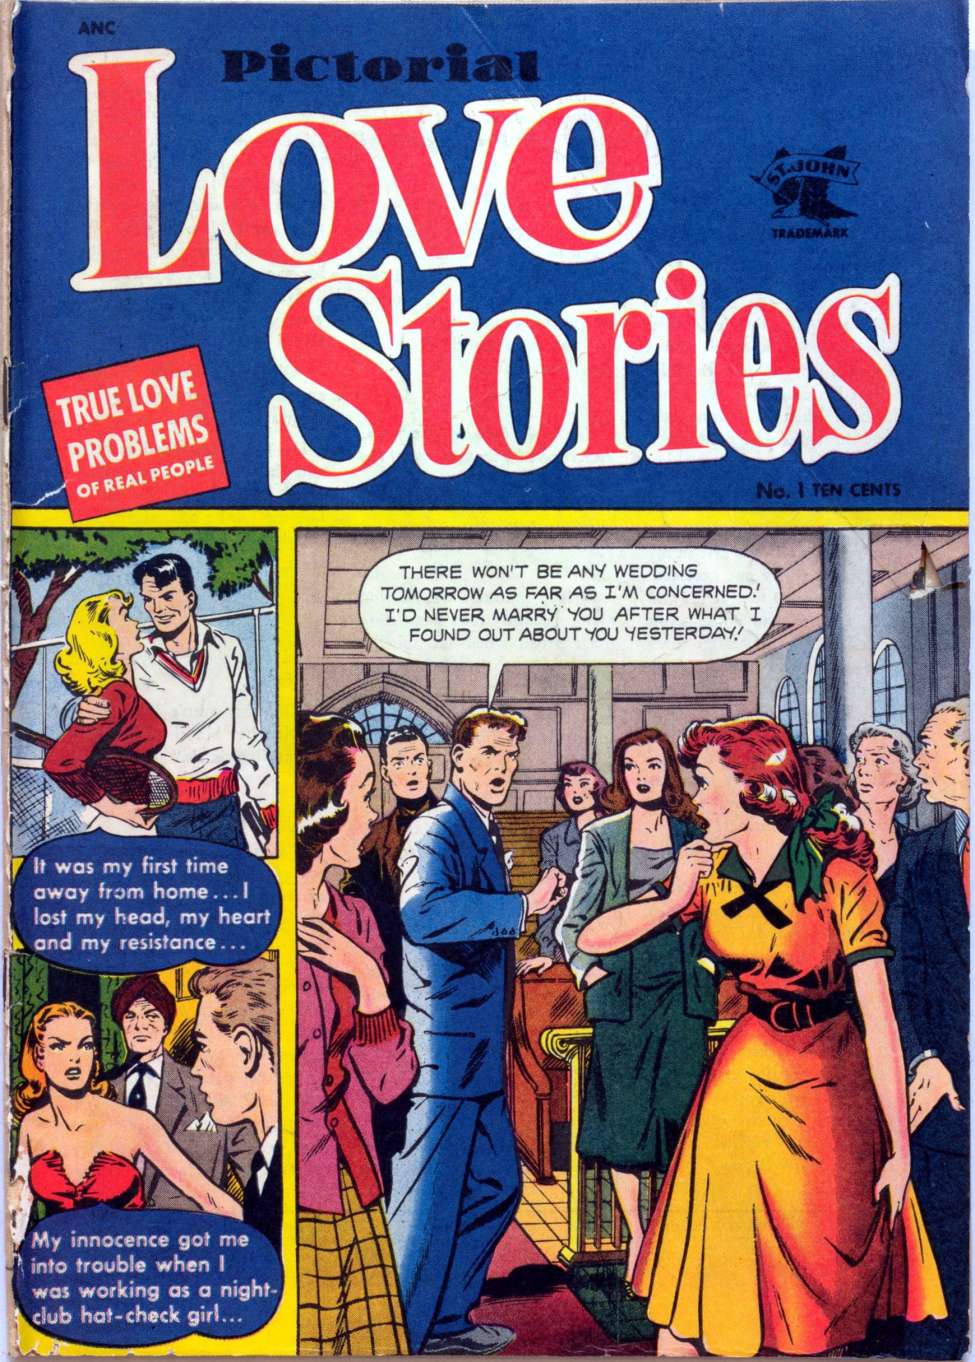 Book Cover For Pictorial Love Stories 1